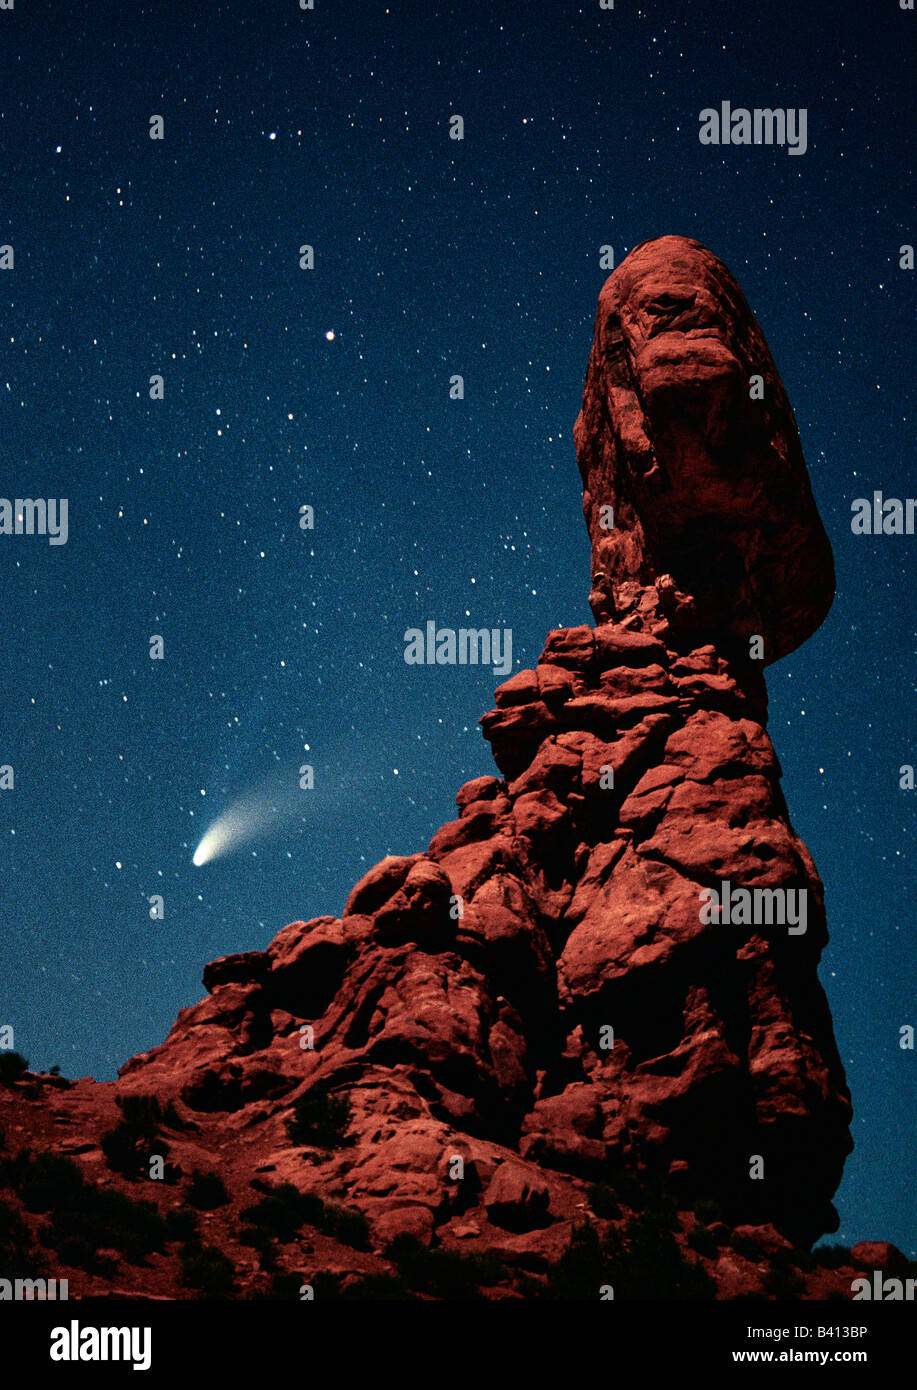 USA, Utah, Arches National Park. Comet Hale-Bopp streaks across the night sky past Balanced Rock, which is lit by a half-moon. Stock Photo